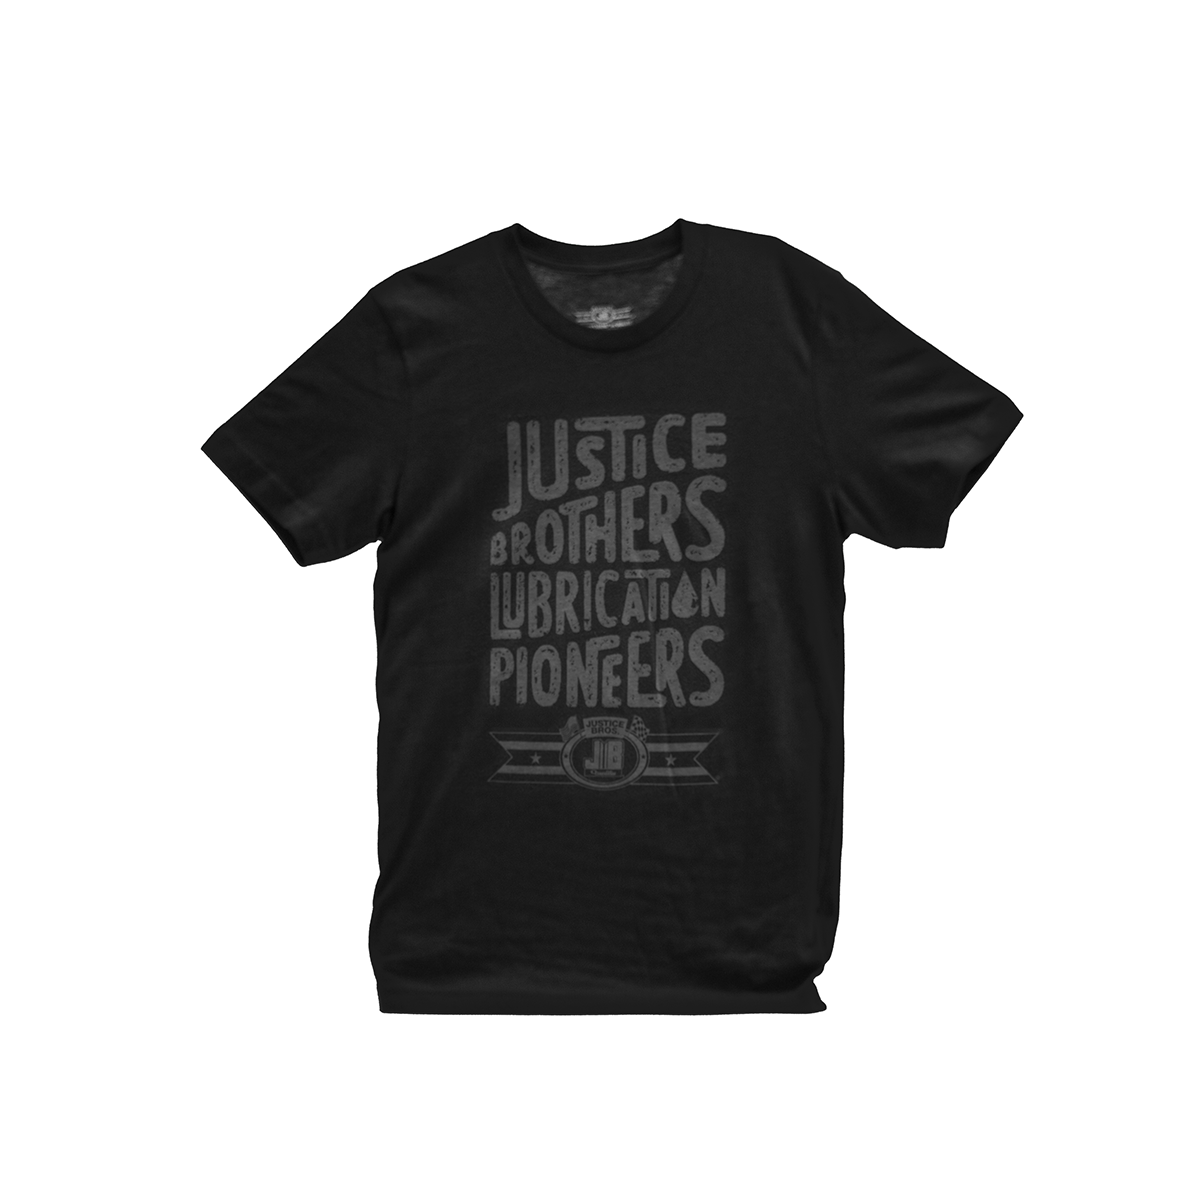 Lubrication Pioneers T-Shirt - Justice Brothers